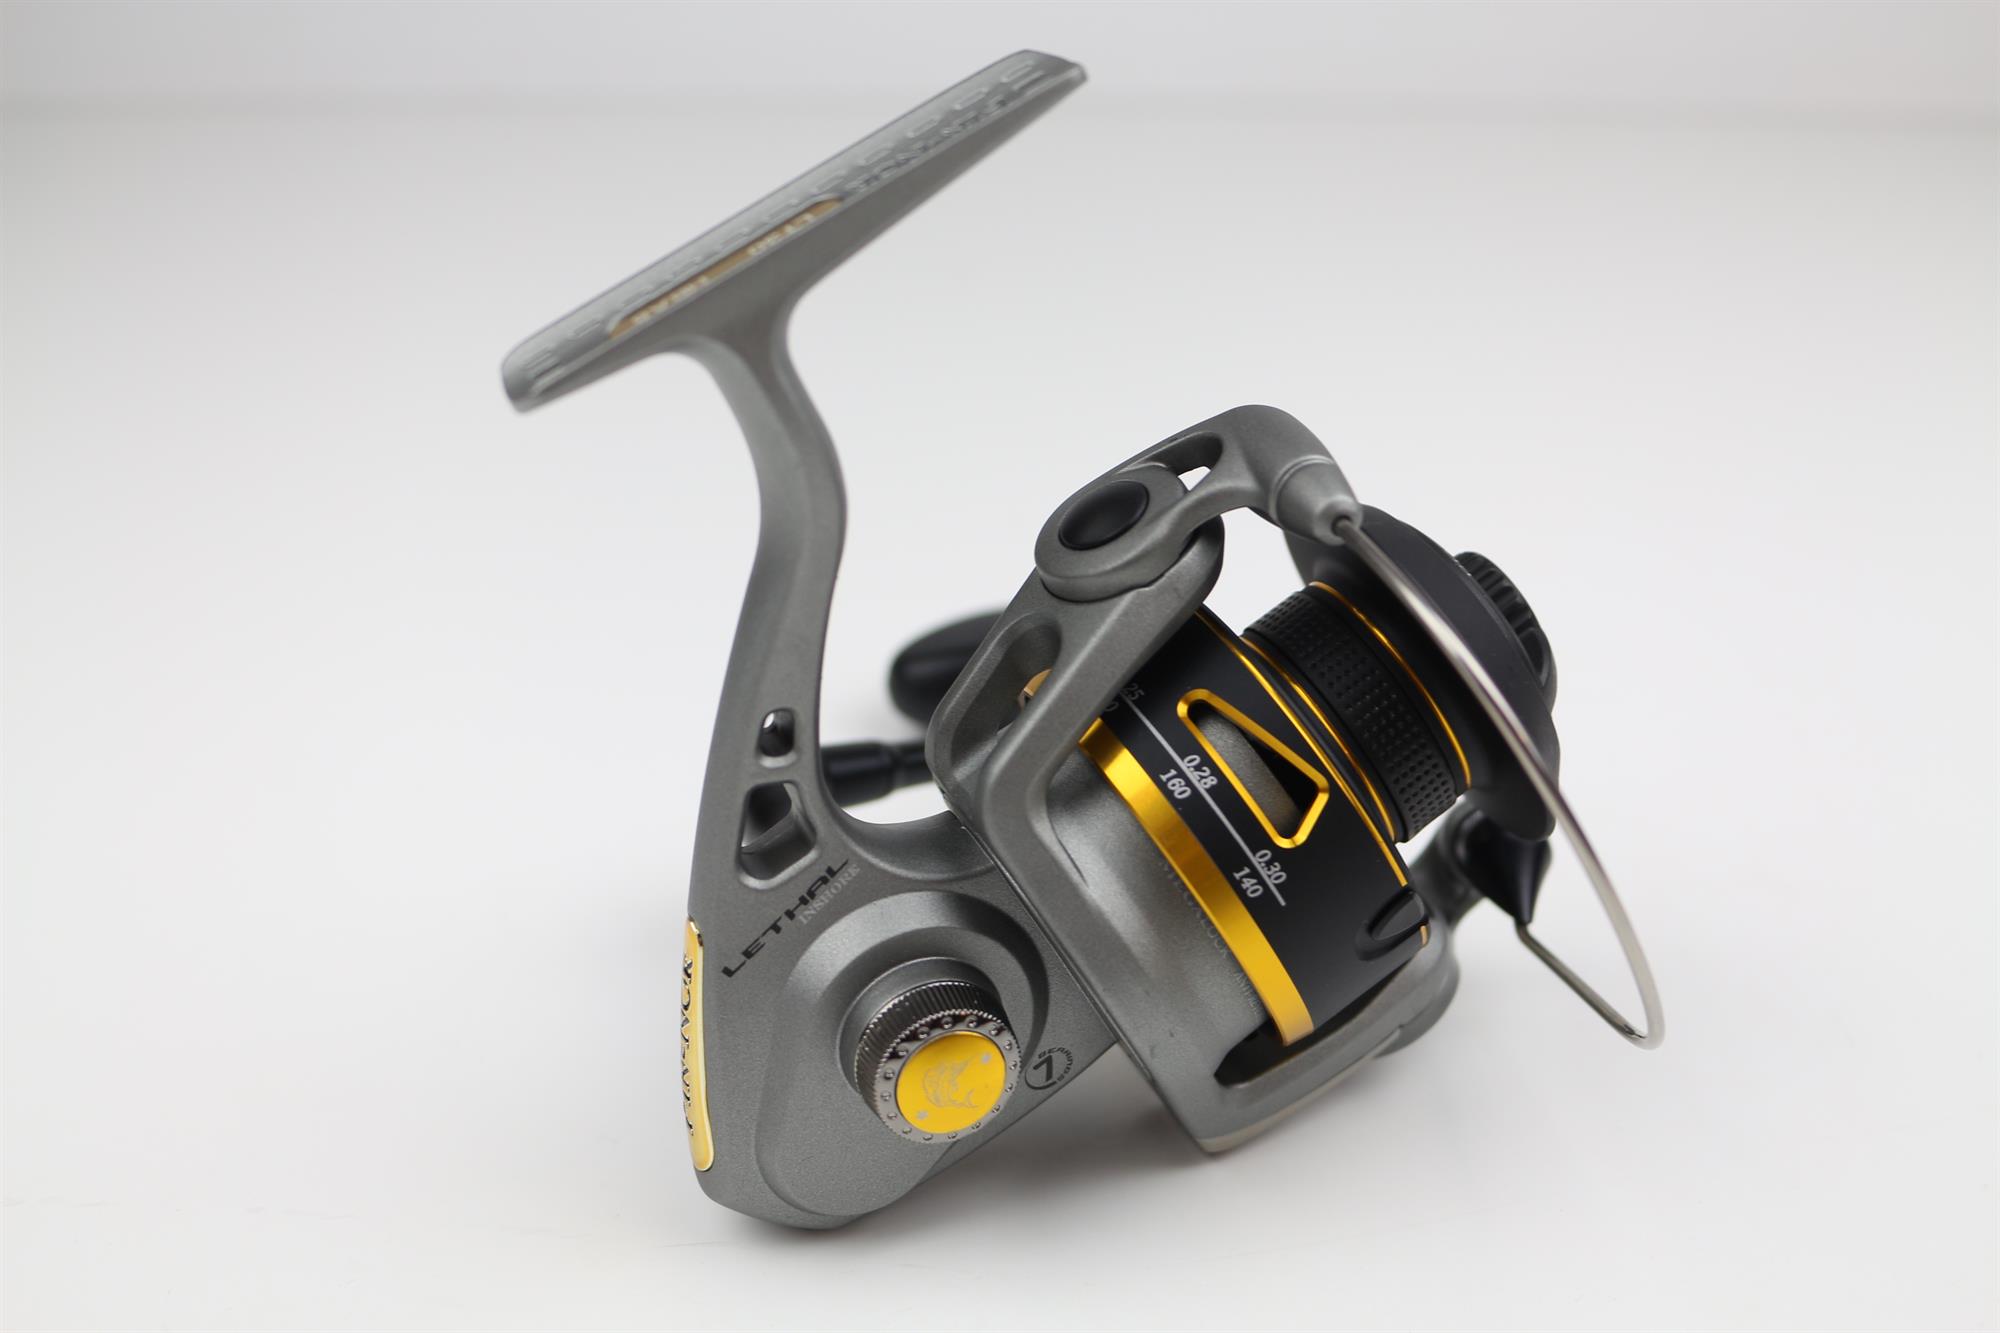 Fin-Nor Lethal LTH - Buy cheap Trolling Reels!